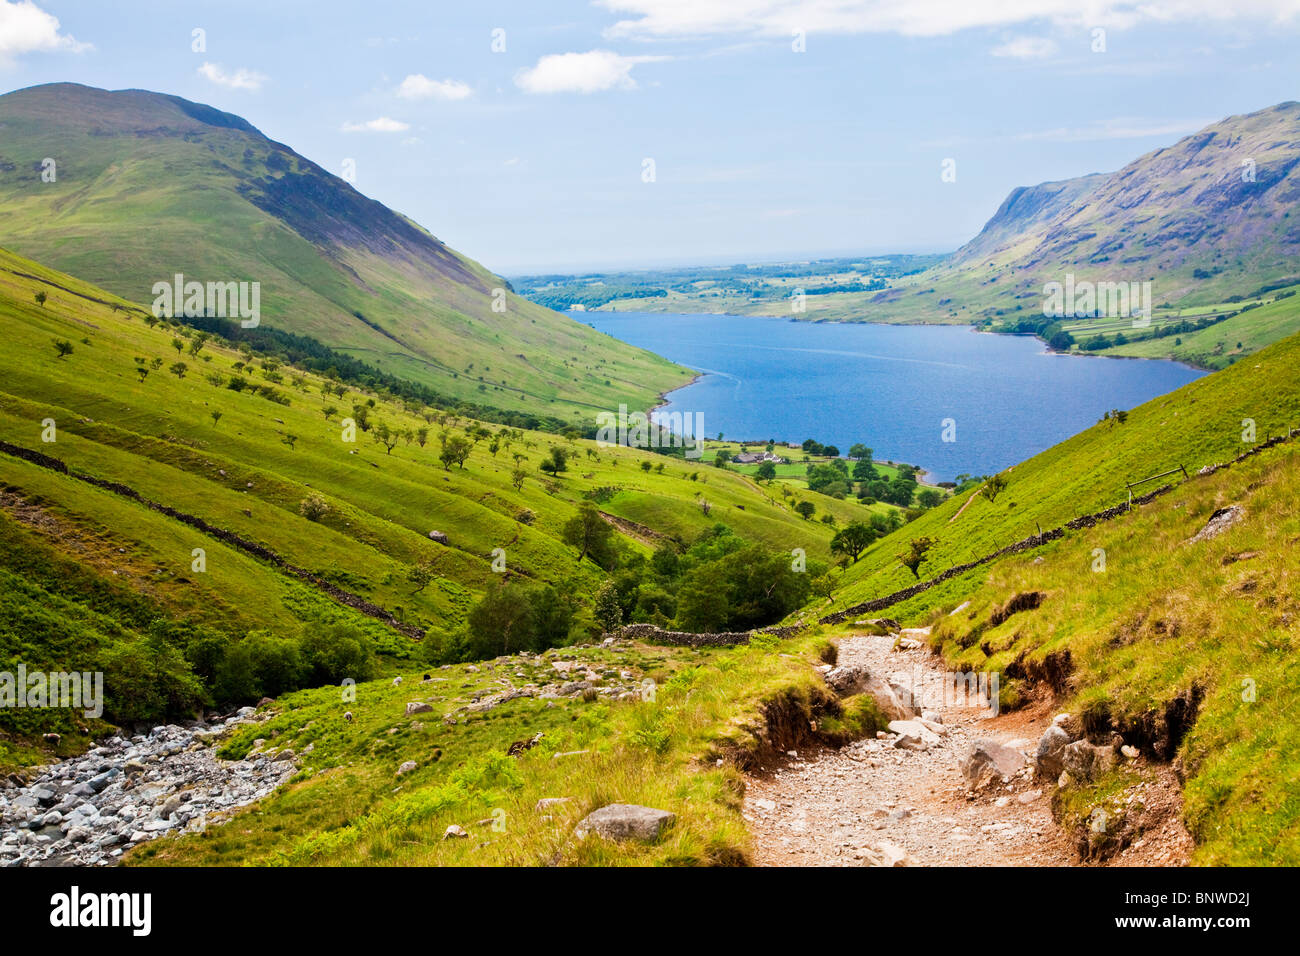 View over Wast Water from the Wasdale Head route up to Scafell Pike, Lake District, Cumbria, England, UK Stock Photo